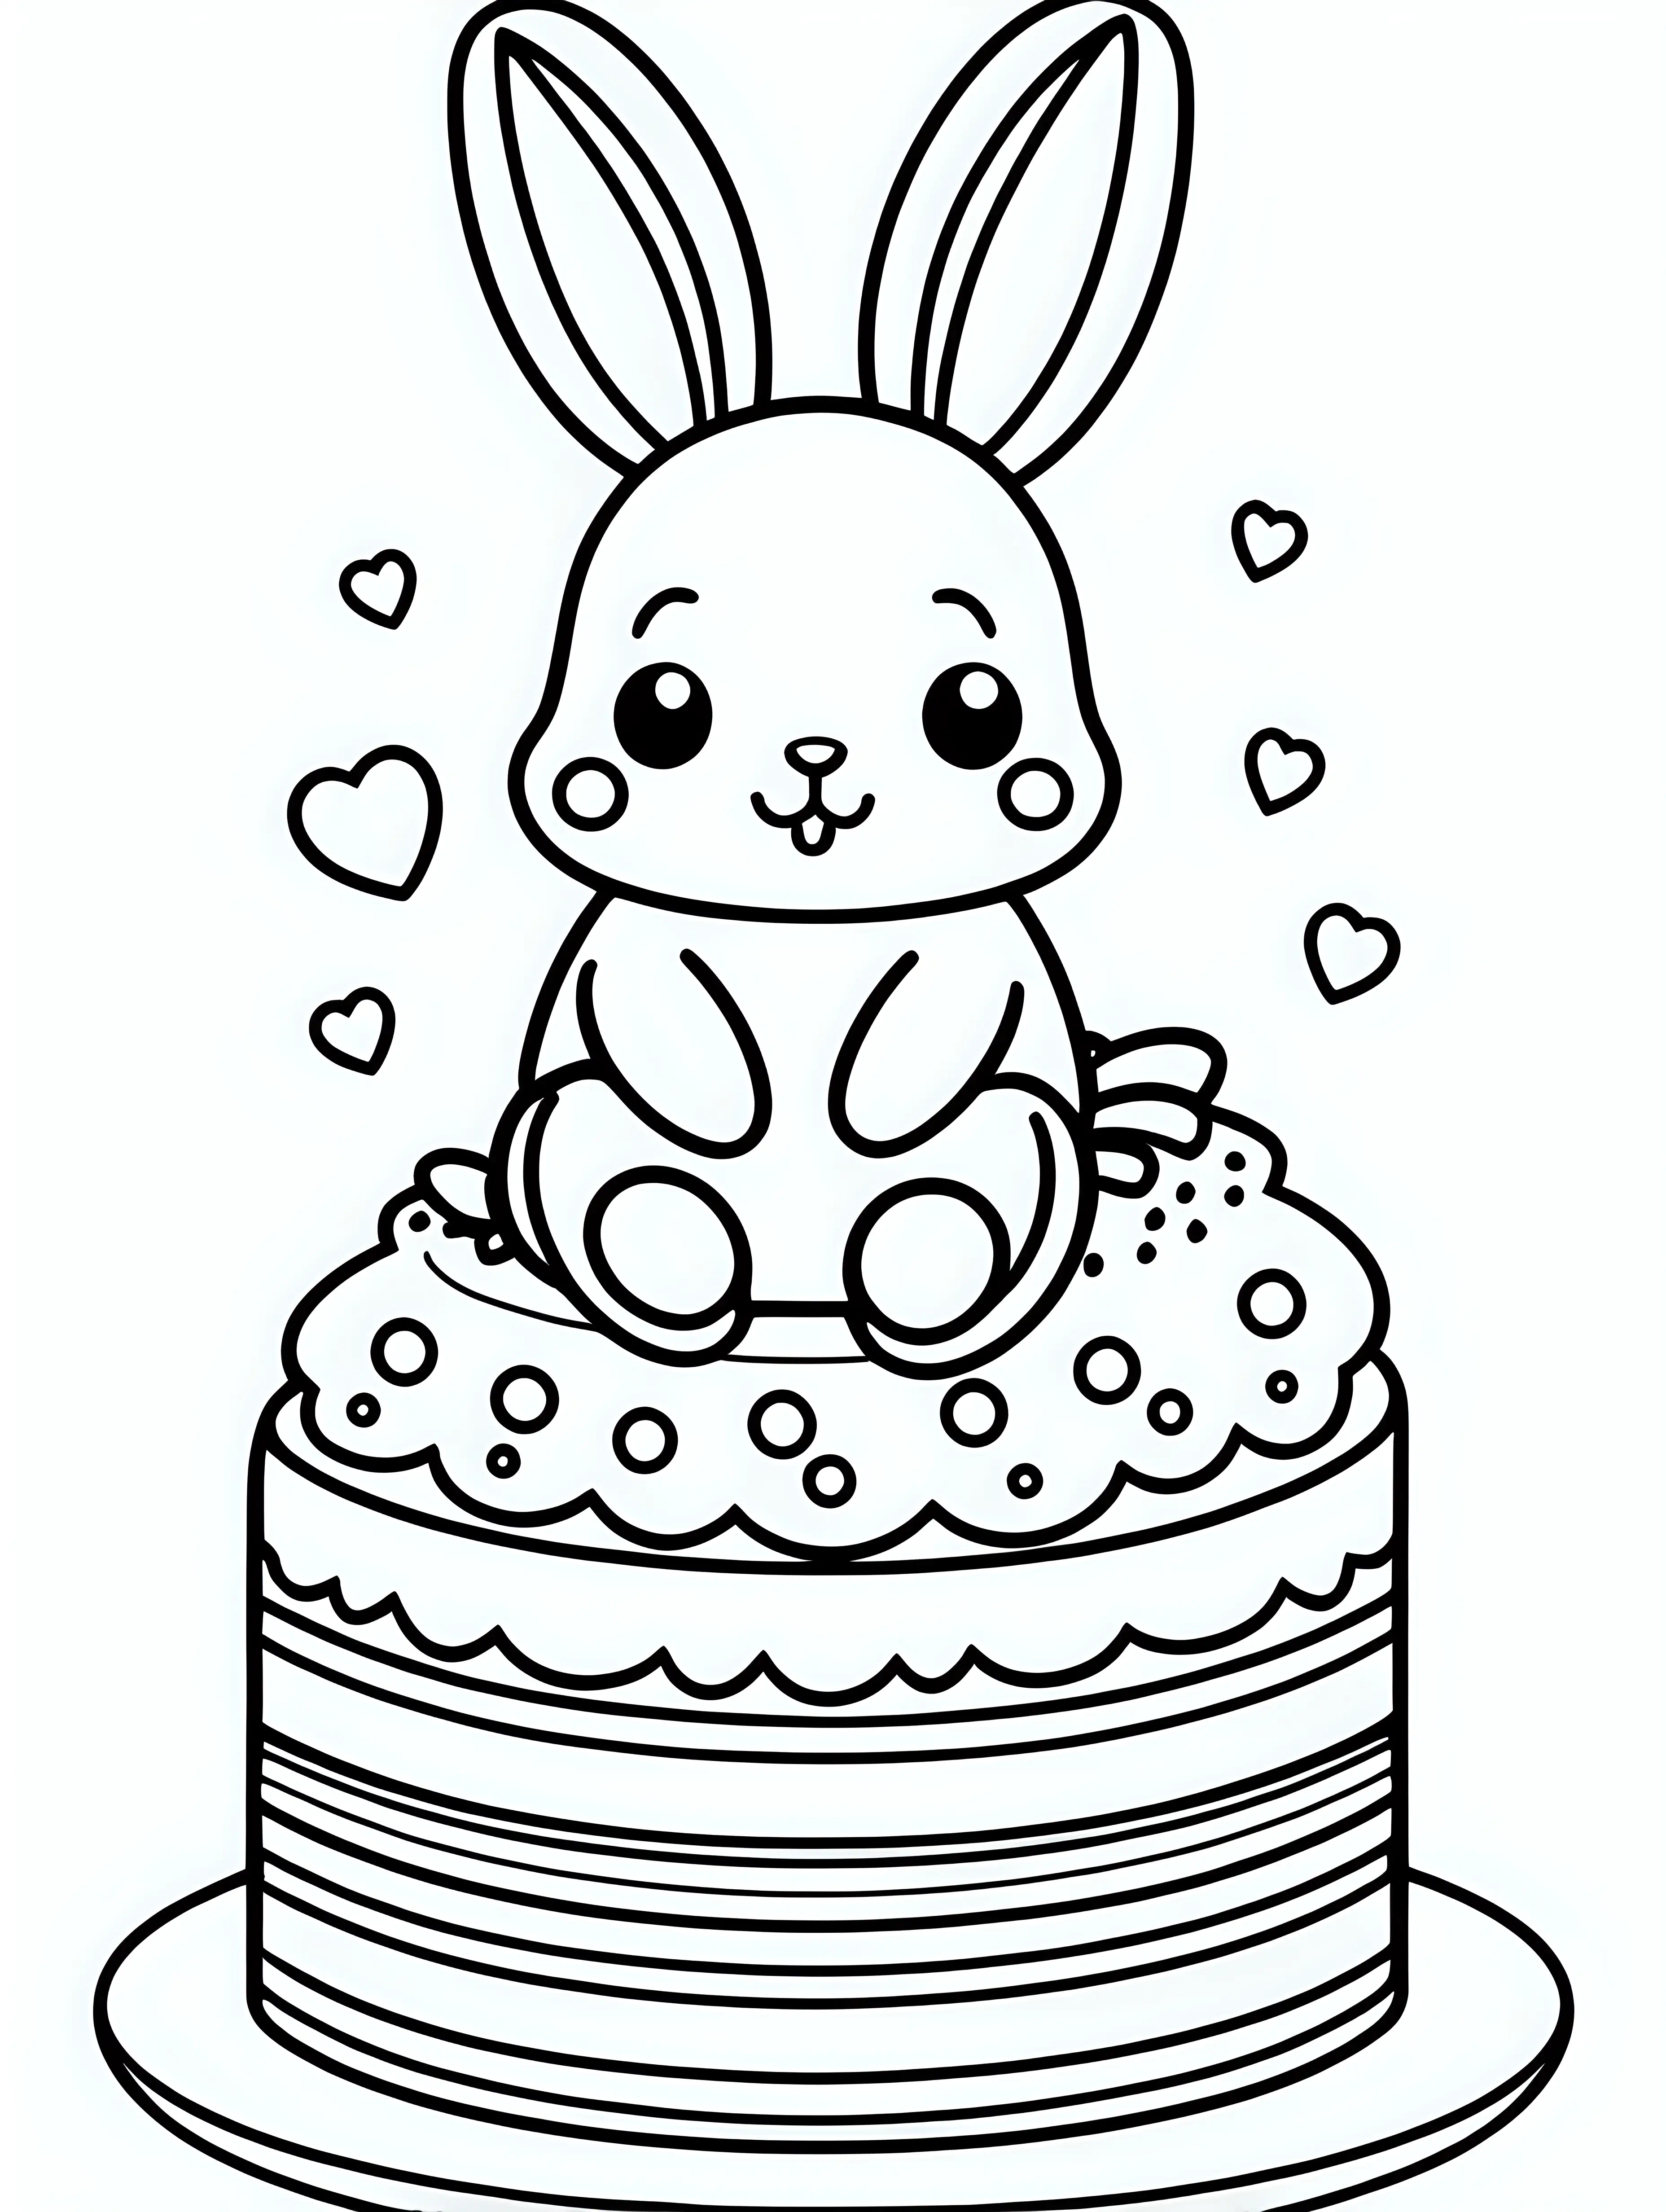 coloring page for kids with a cute kawaii bunny sitting on a cake, black lines white background, only black and white